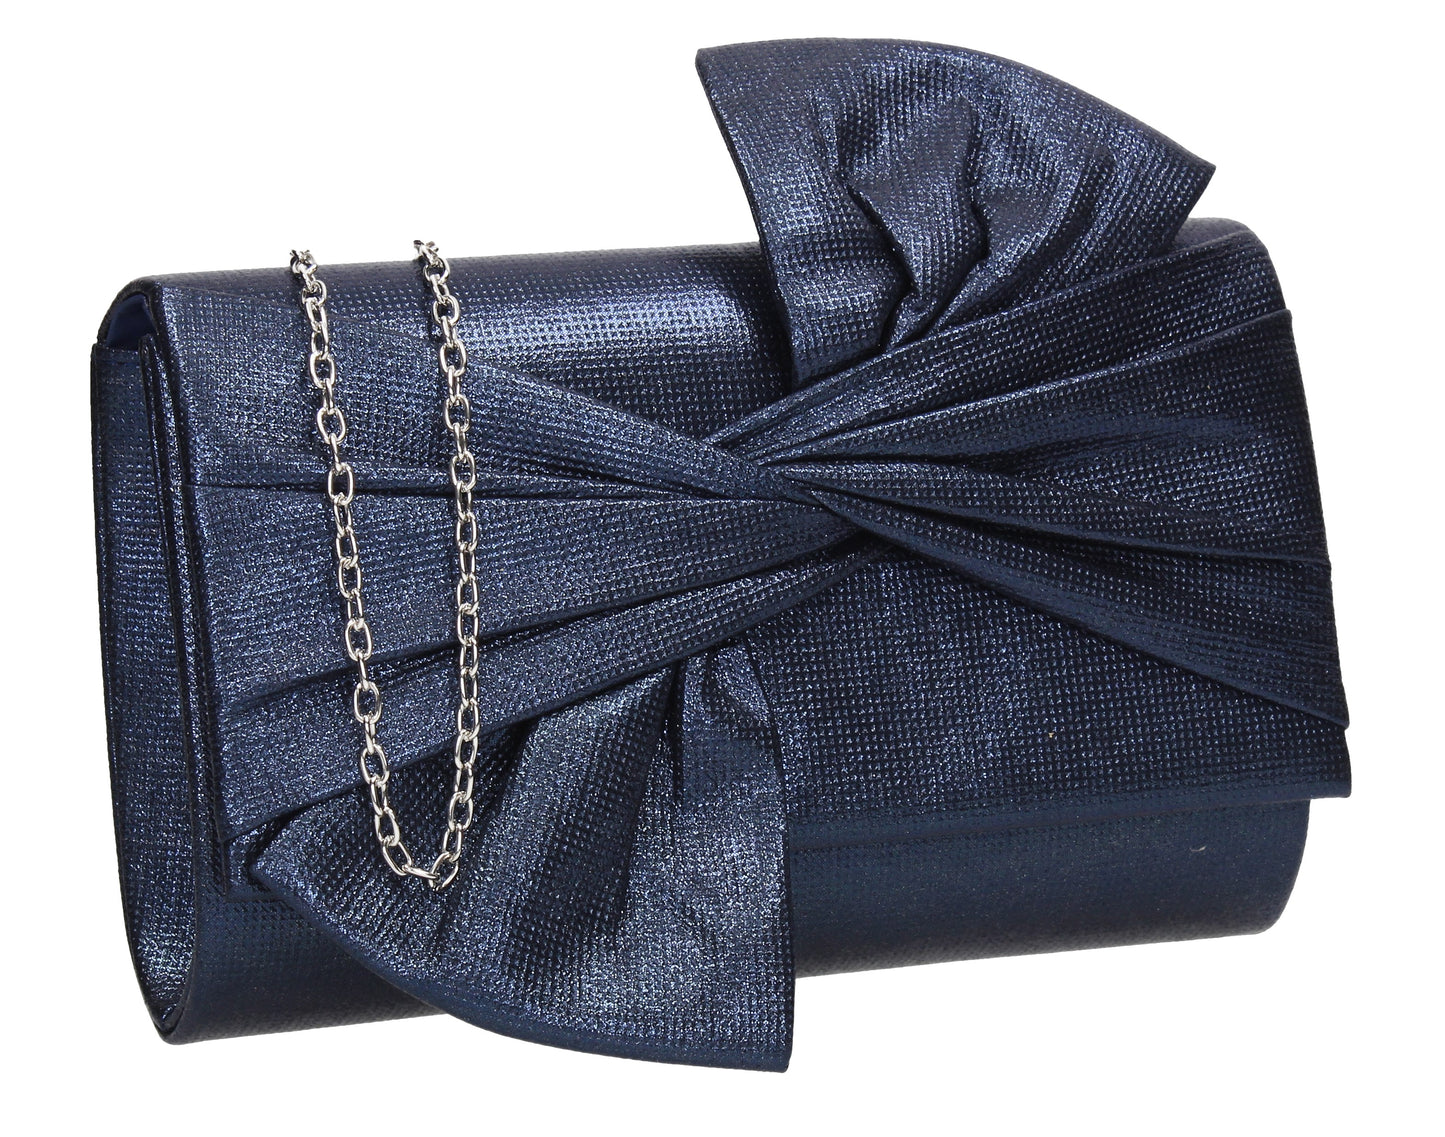 June Bow Style Clutch Bag Navy Blue